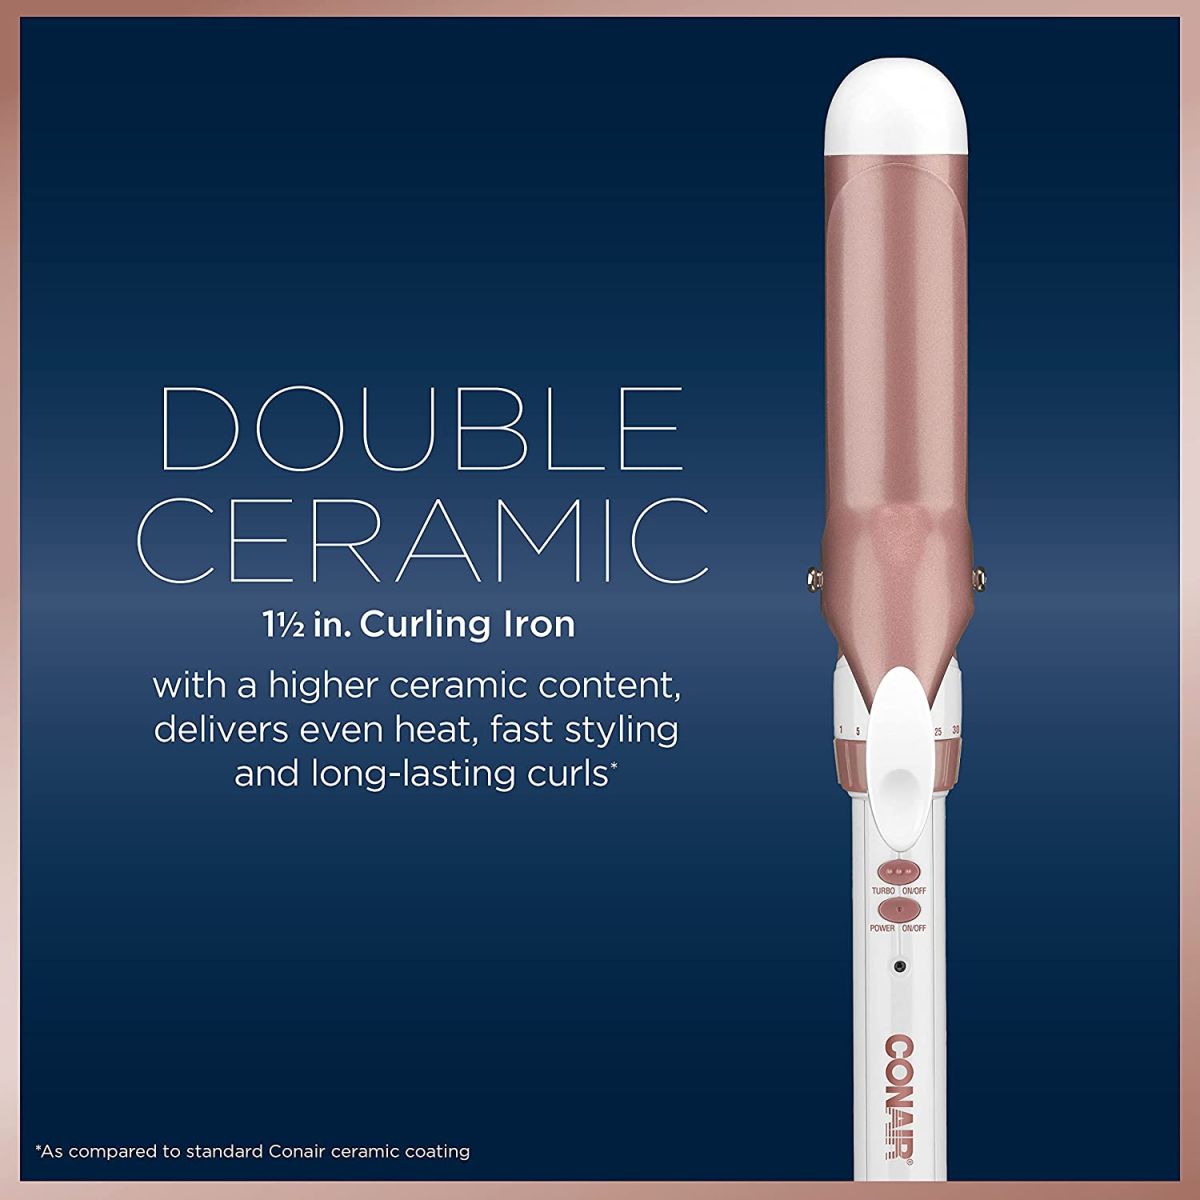 Double Ceramic 1 1/2-Inch Curling Iron, 1 ½ inch barrel produces soft waves – for use on medium and long hair, White/Rose Gold